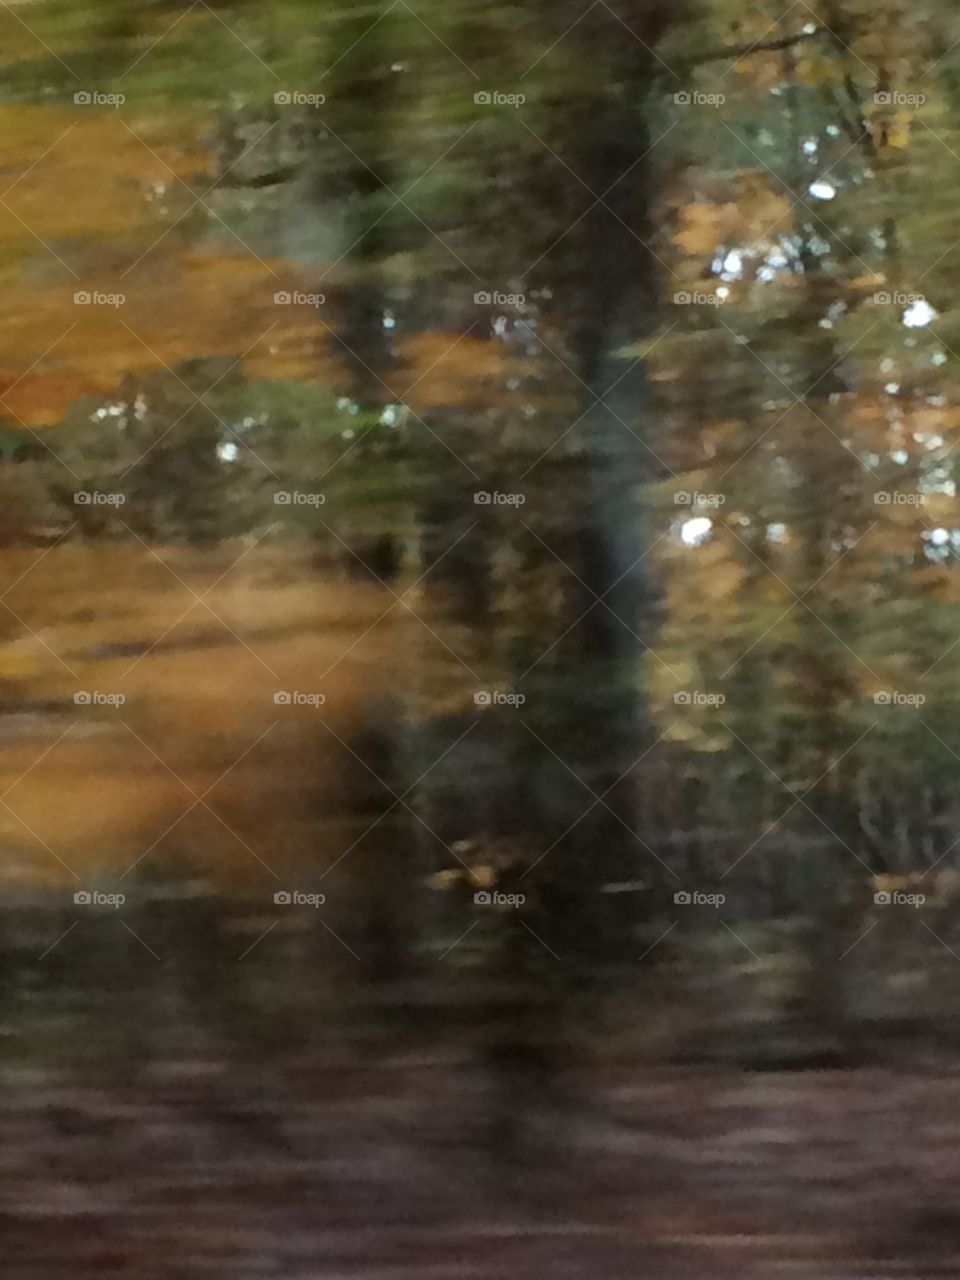 Trees Passing By. A look at a swamp as we drive along